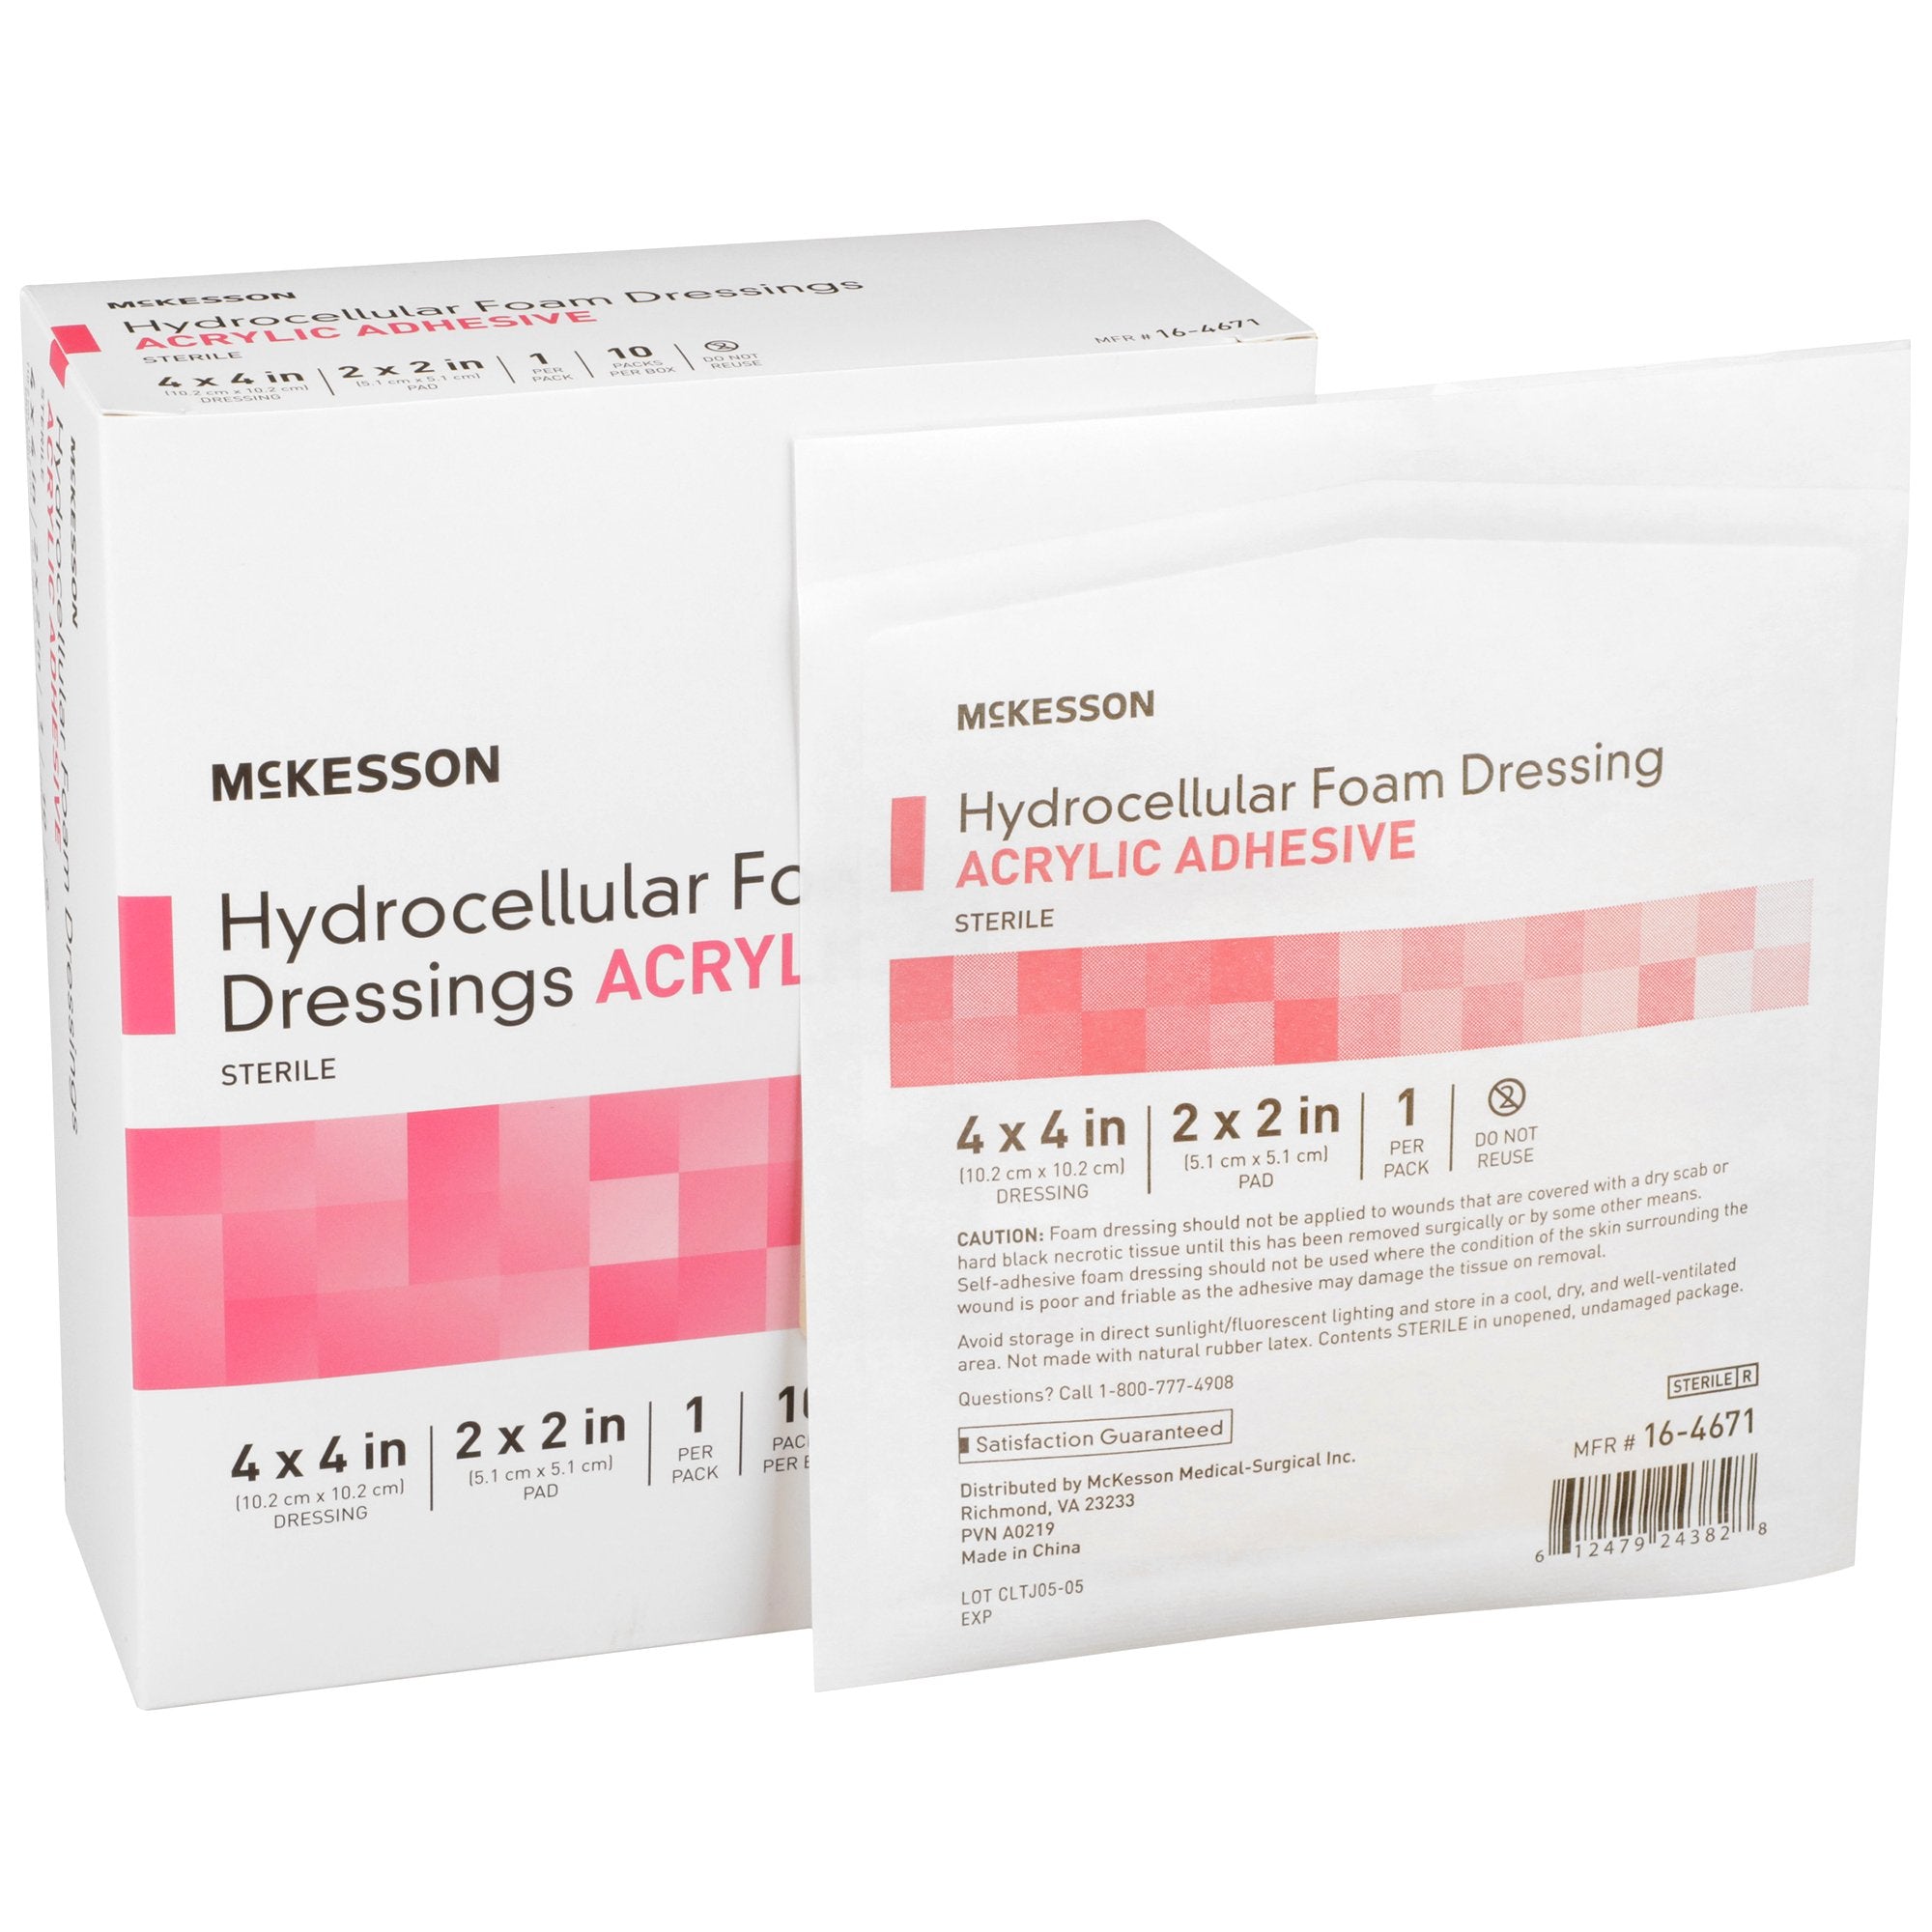 Foam Dressing McKesson 4 X 4 Inch With Border Film Backing Acrylic Adhesive Square Sterile